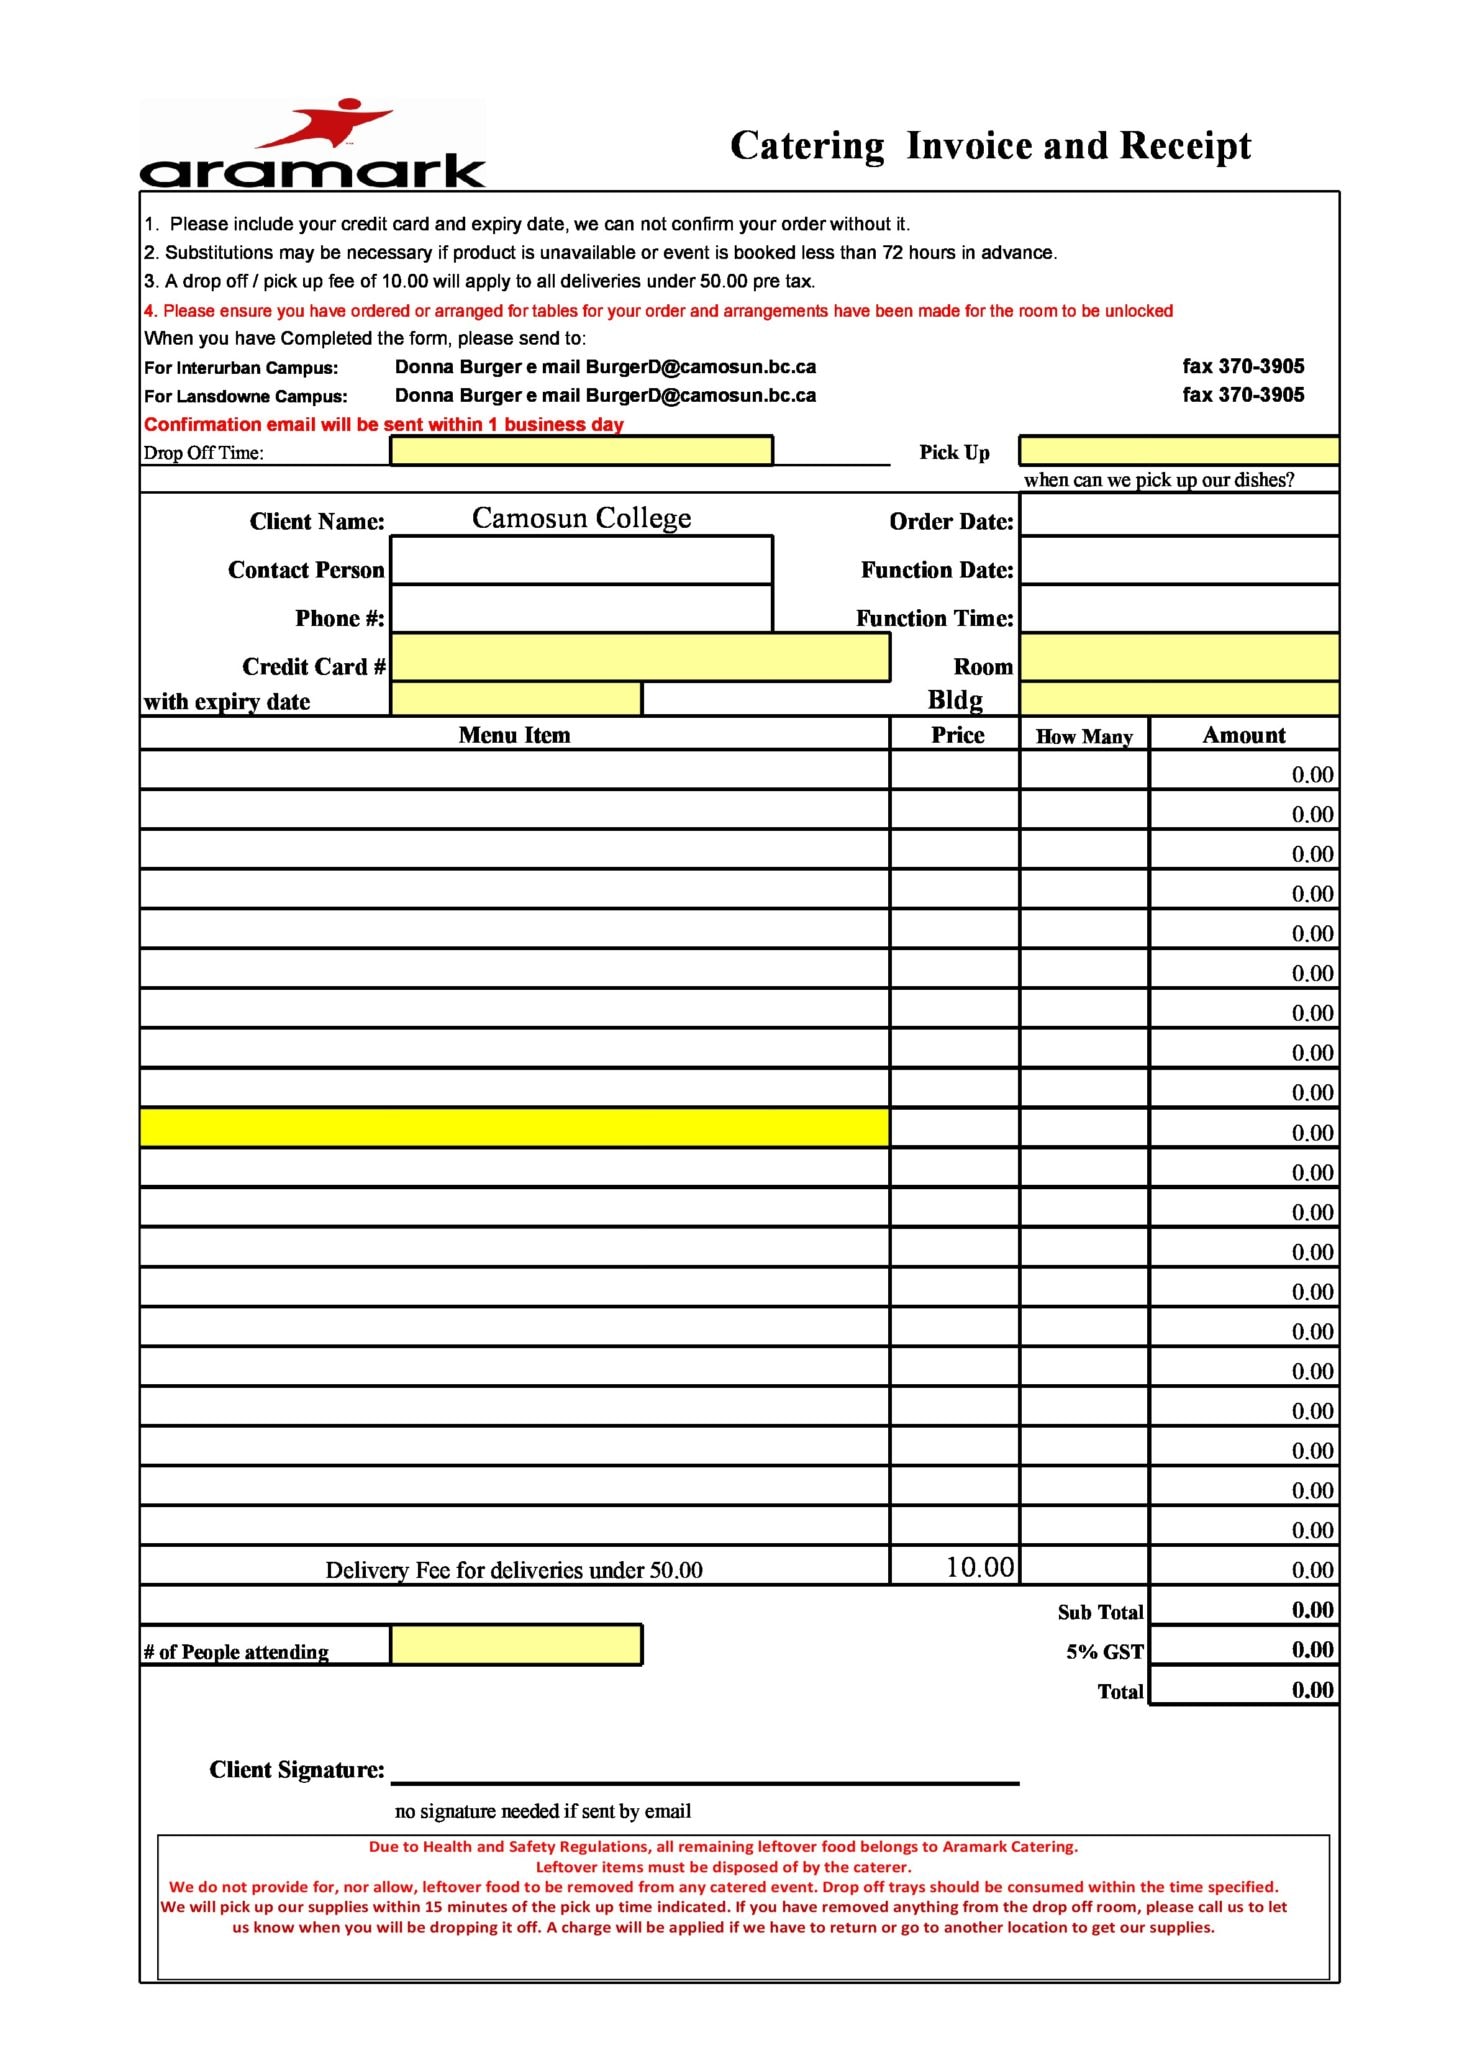 30 Free Catering Invoices (Templates & Samples)